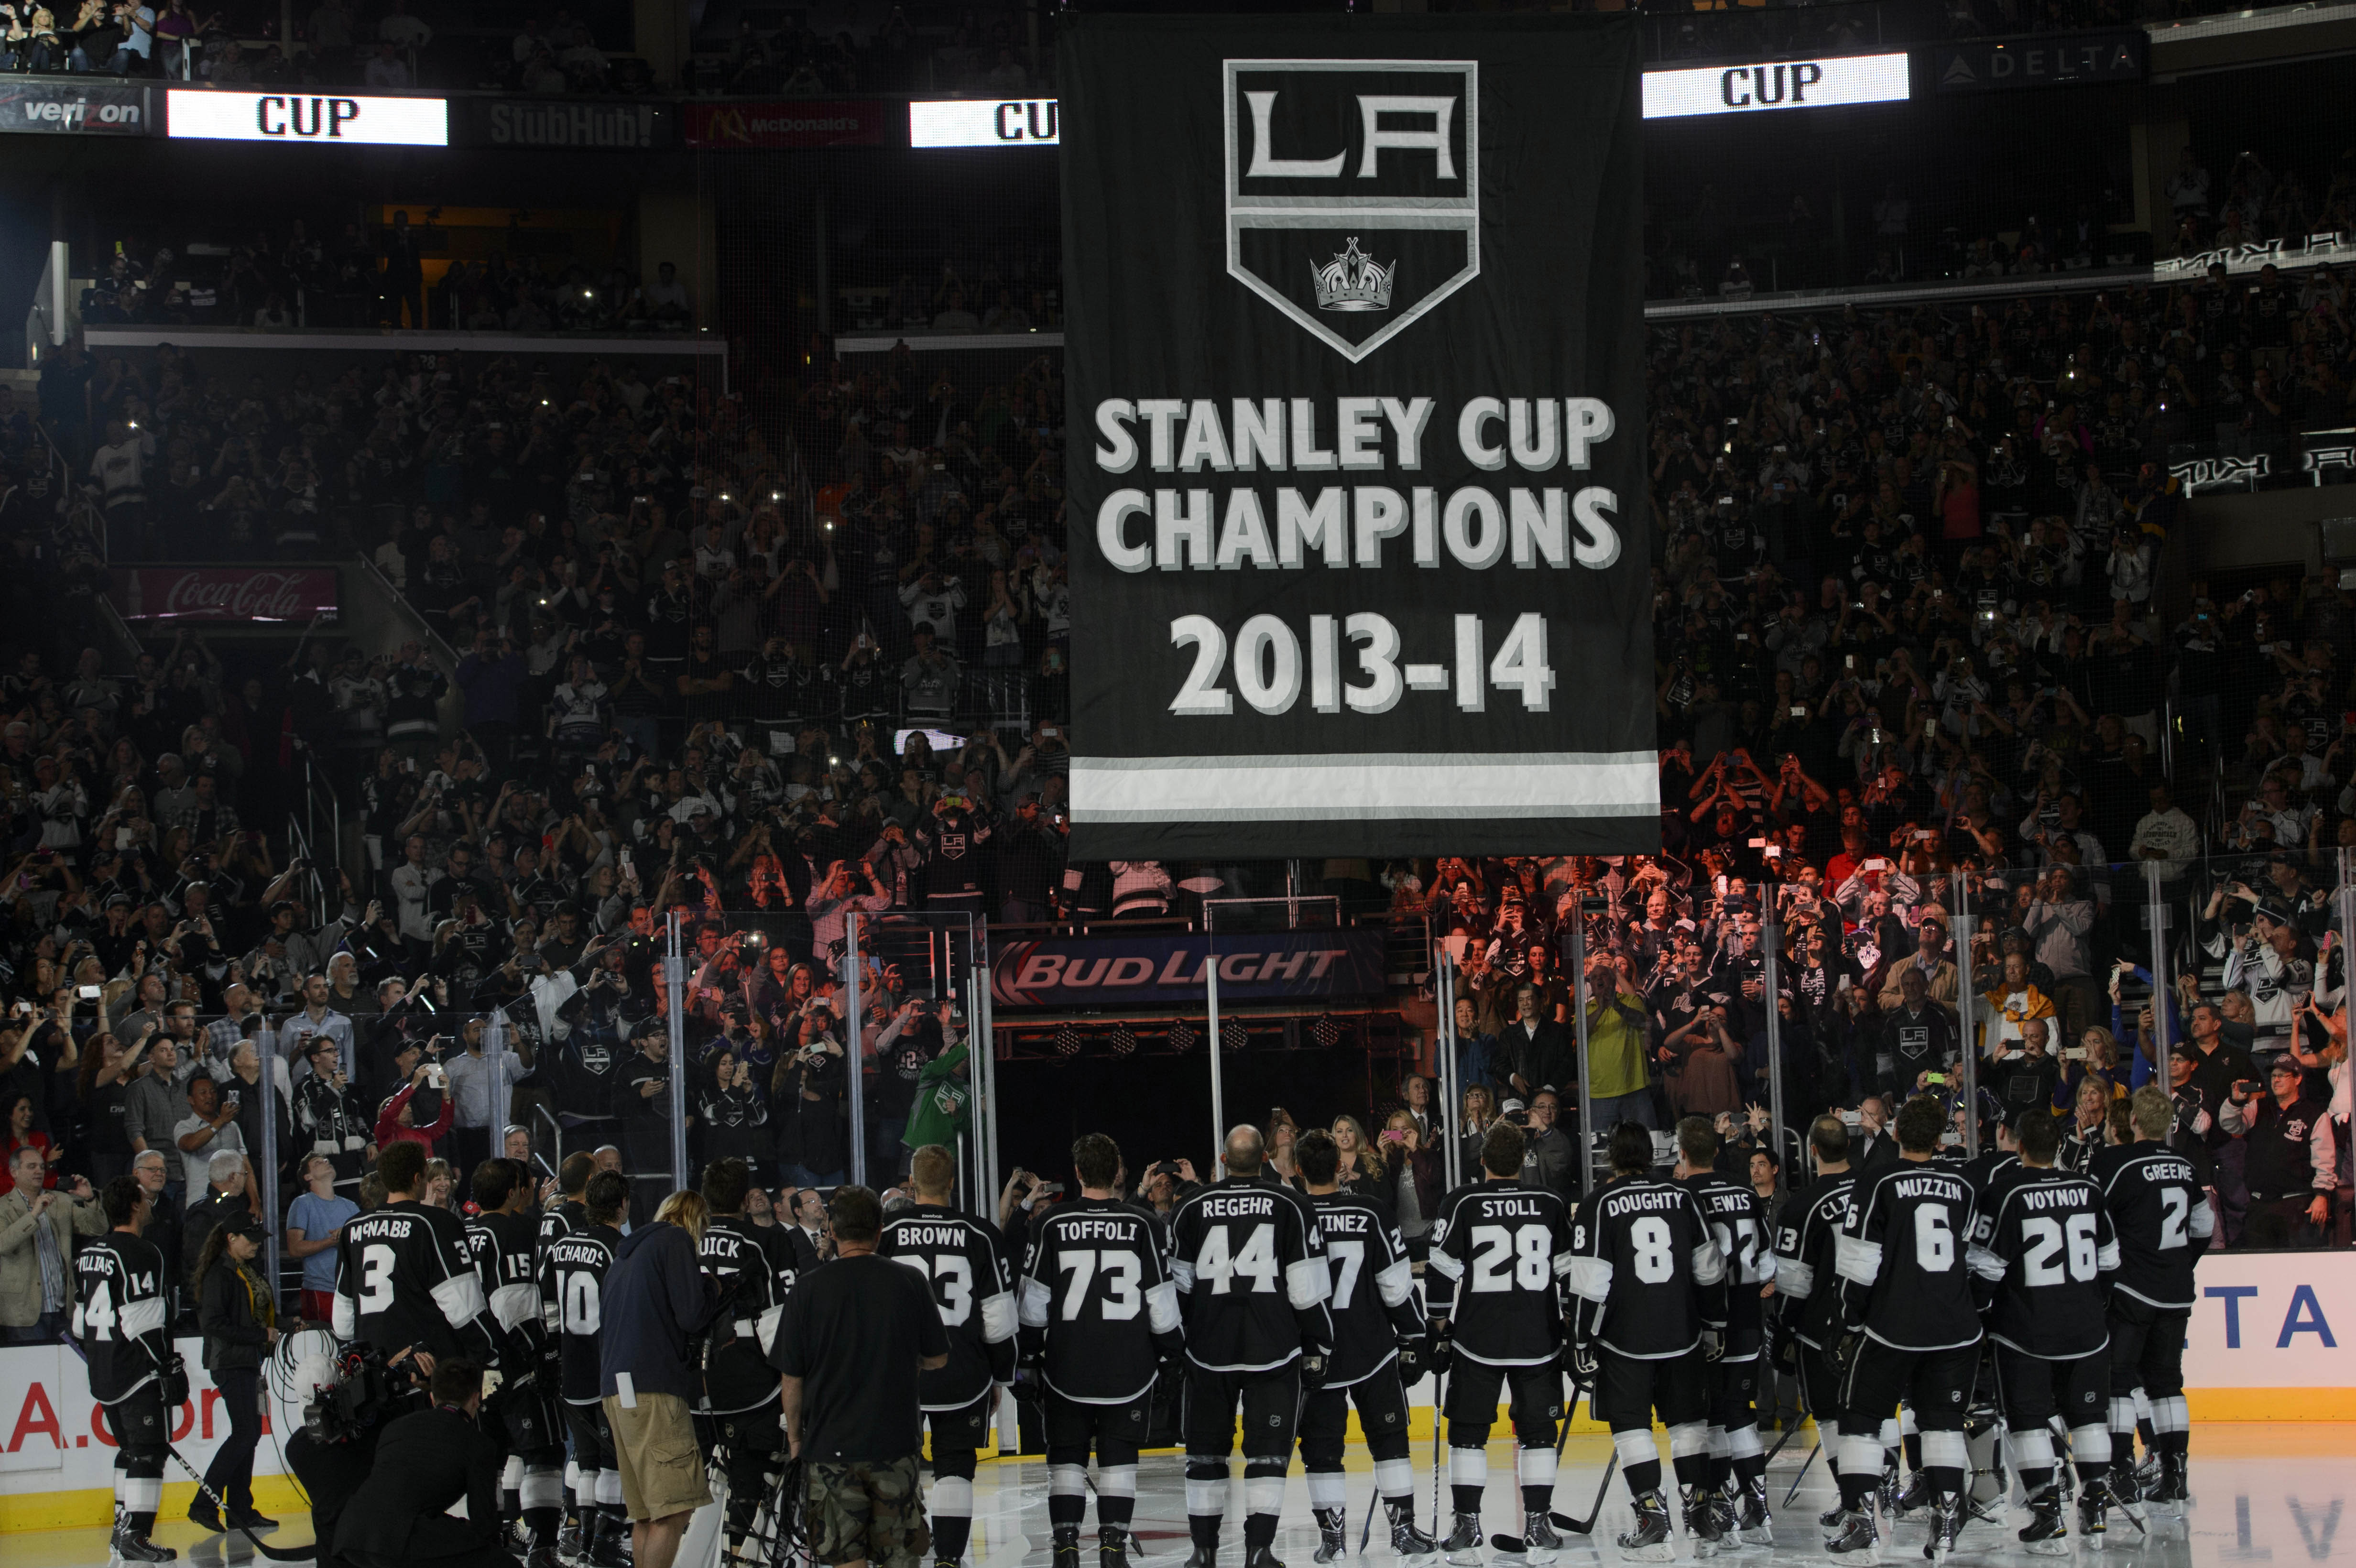 WATCH: Kings Raise Championship Banner, Lower Stanley Cup